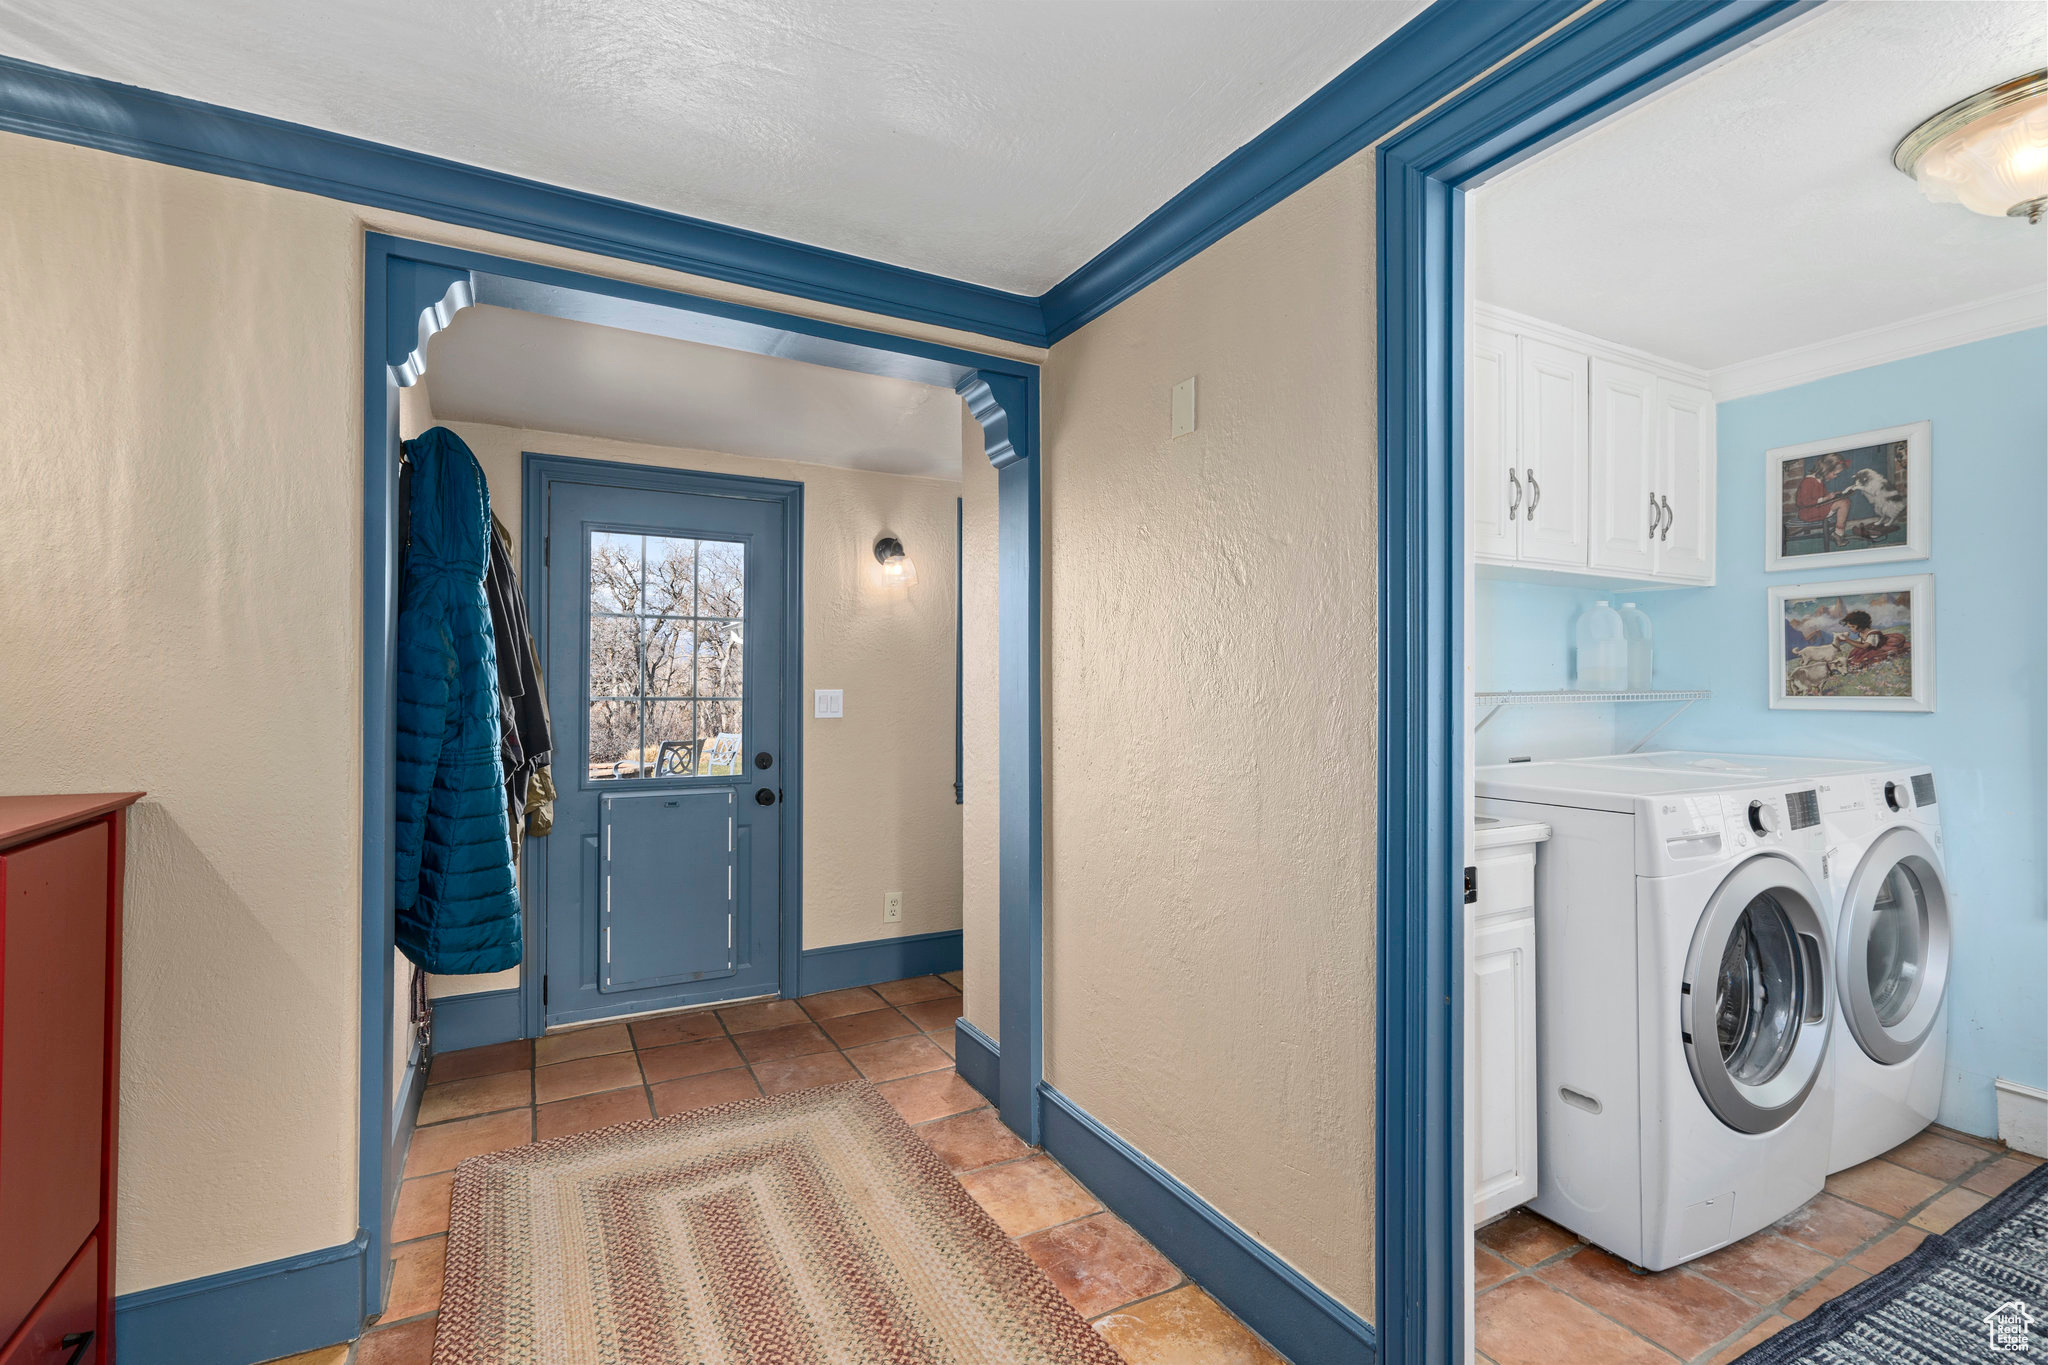 Clothes washing area with washer and clothes dryer, light tile floors, crown molding, and cabinets, tiled entryway between garage, kitchen, front and back yards.